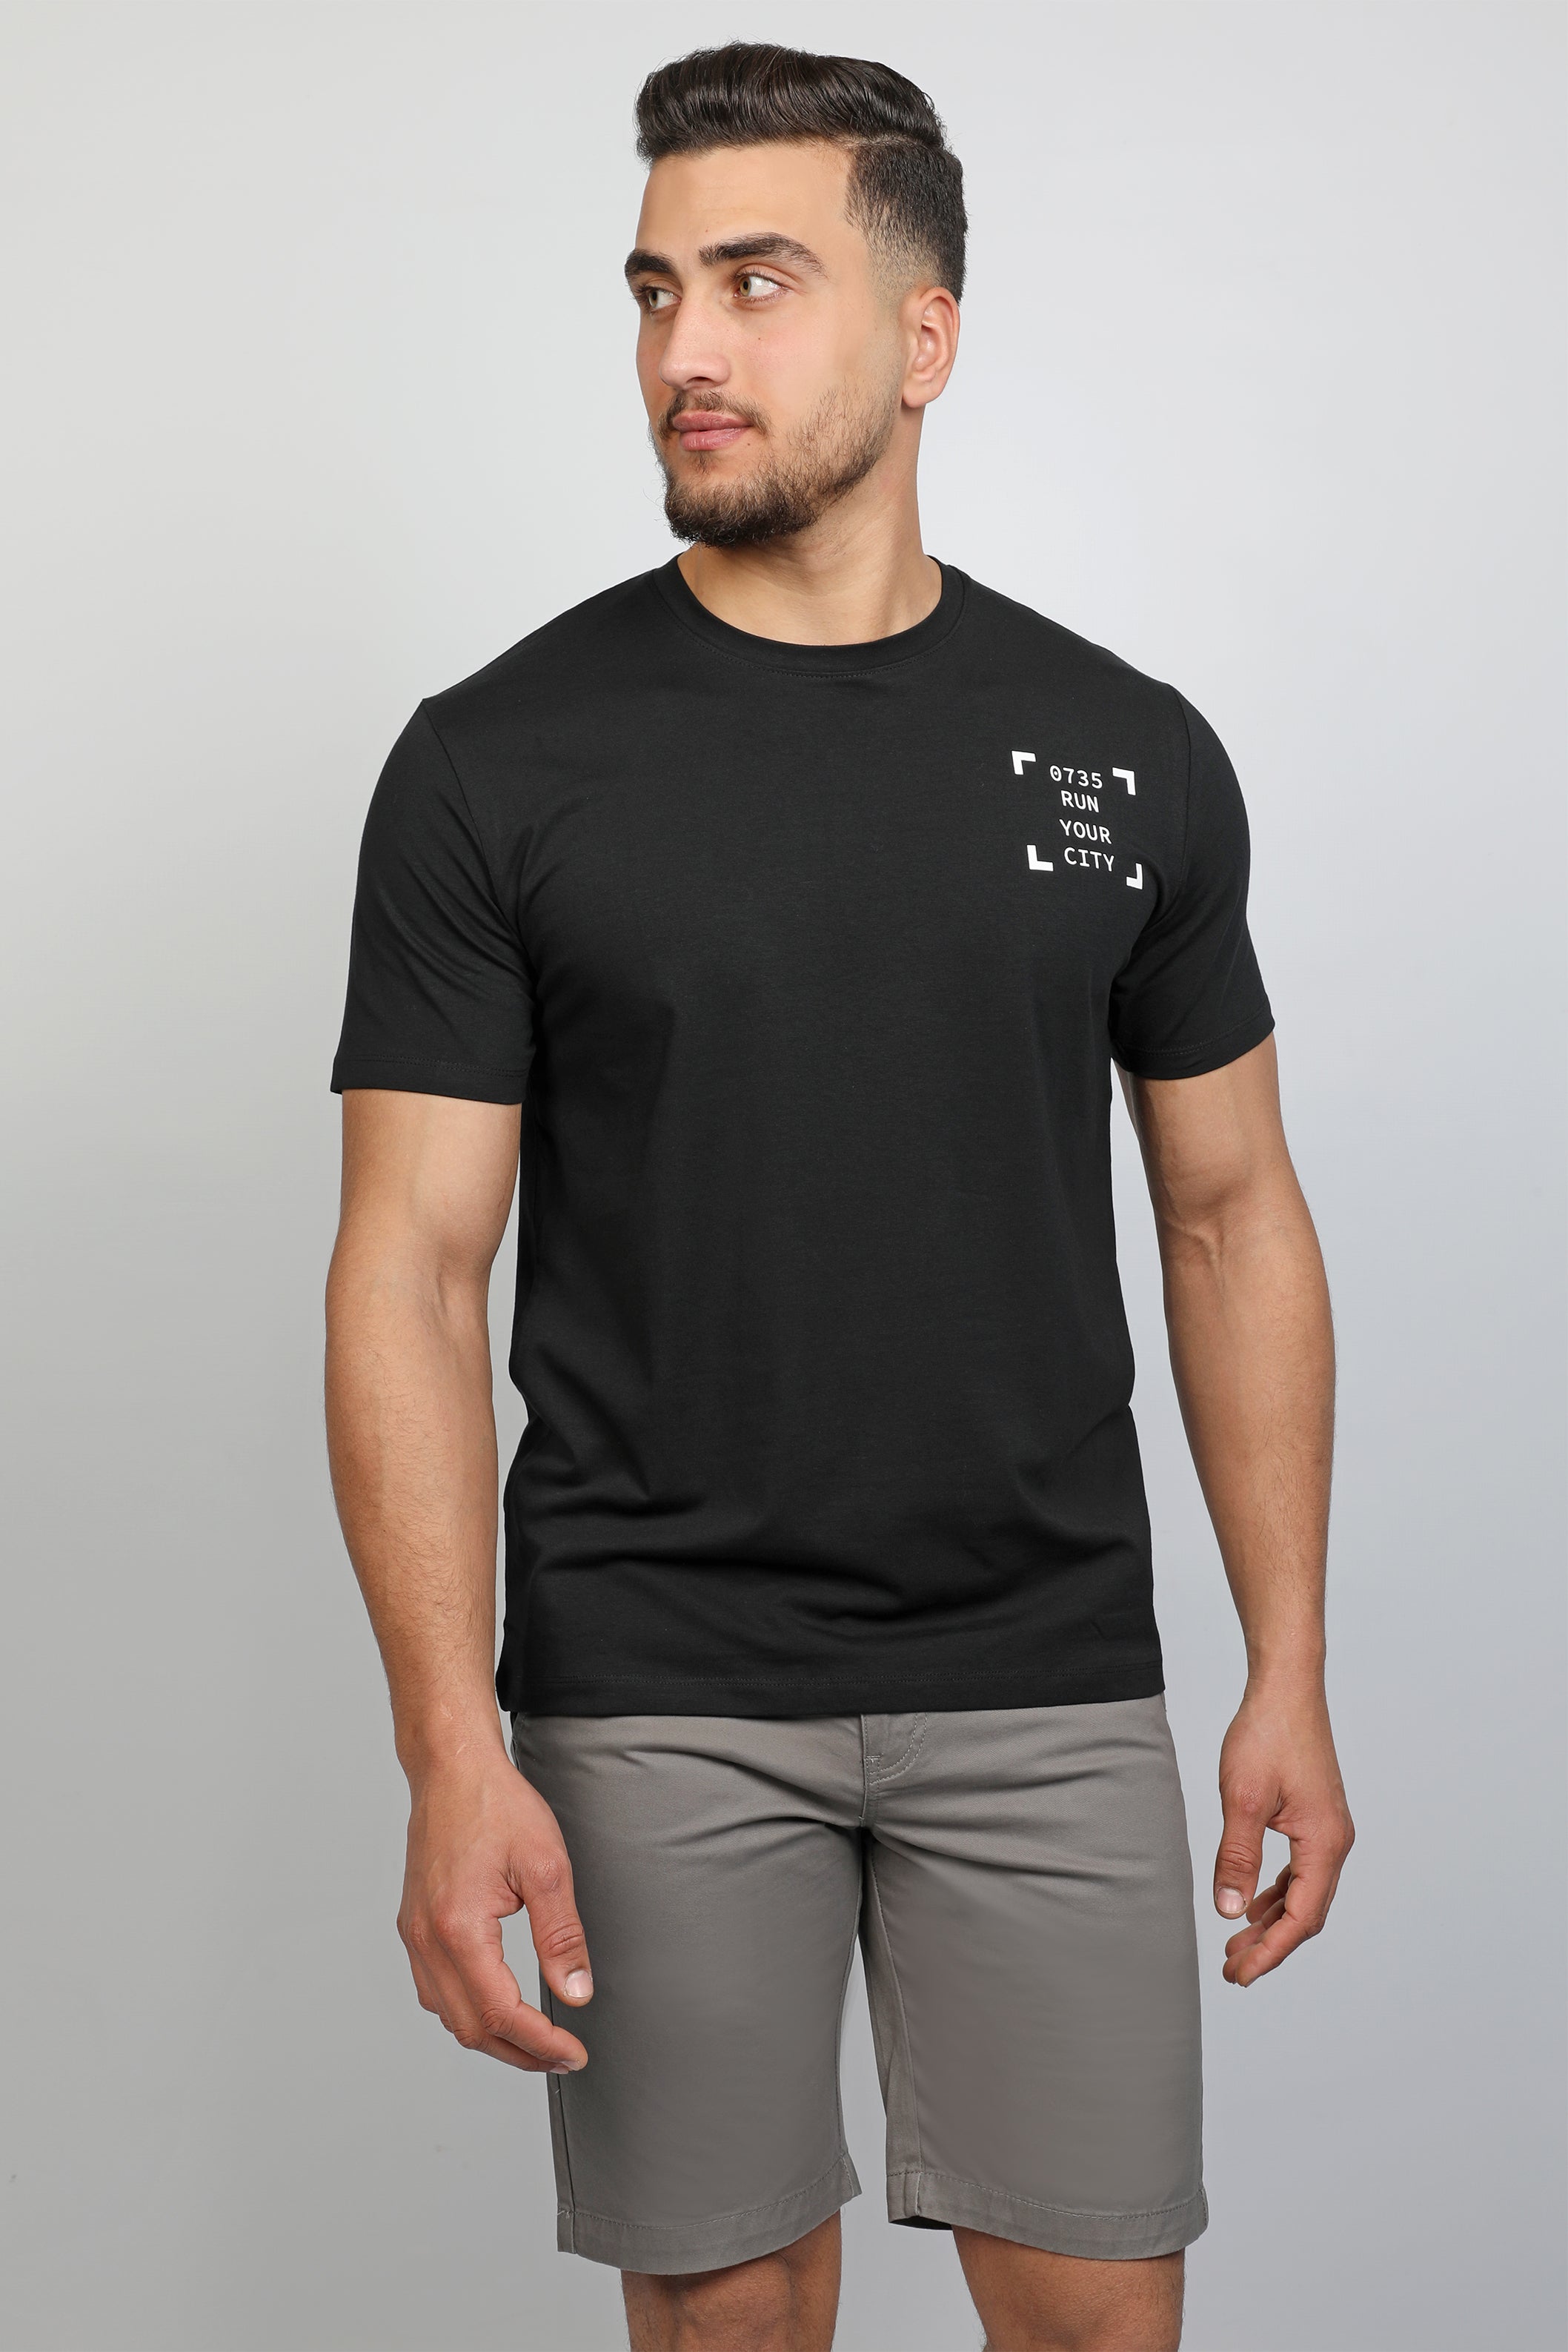 Black T-shirt With Printed Front and back Design